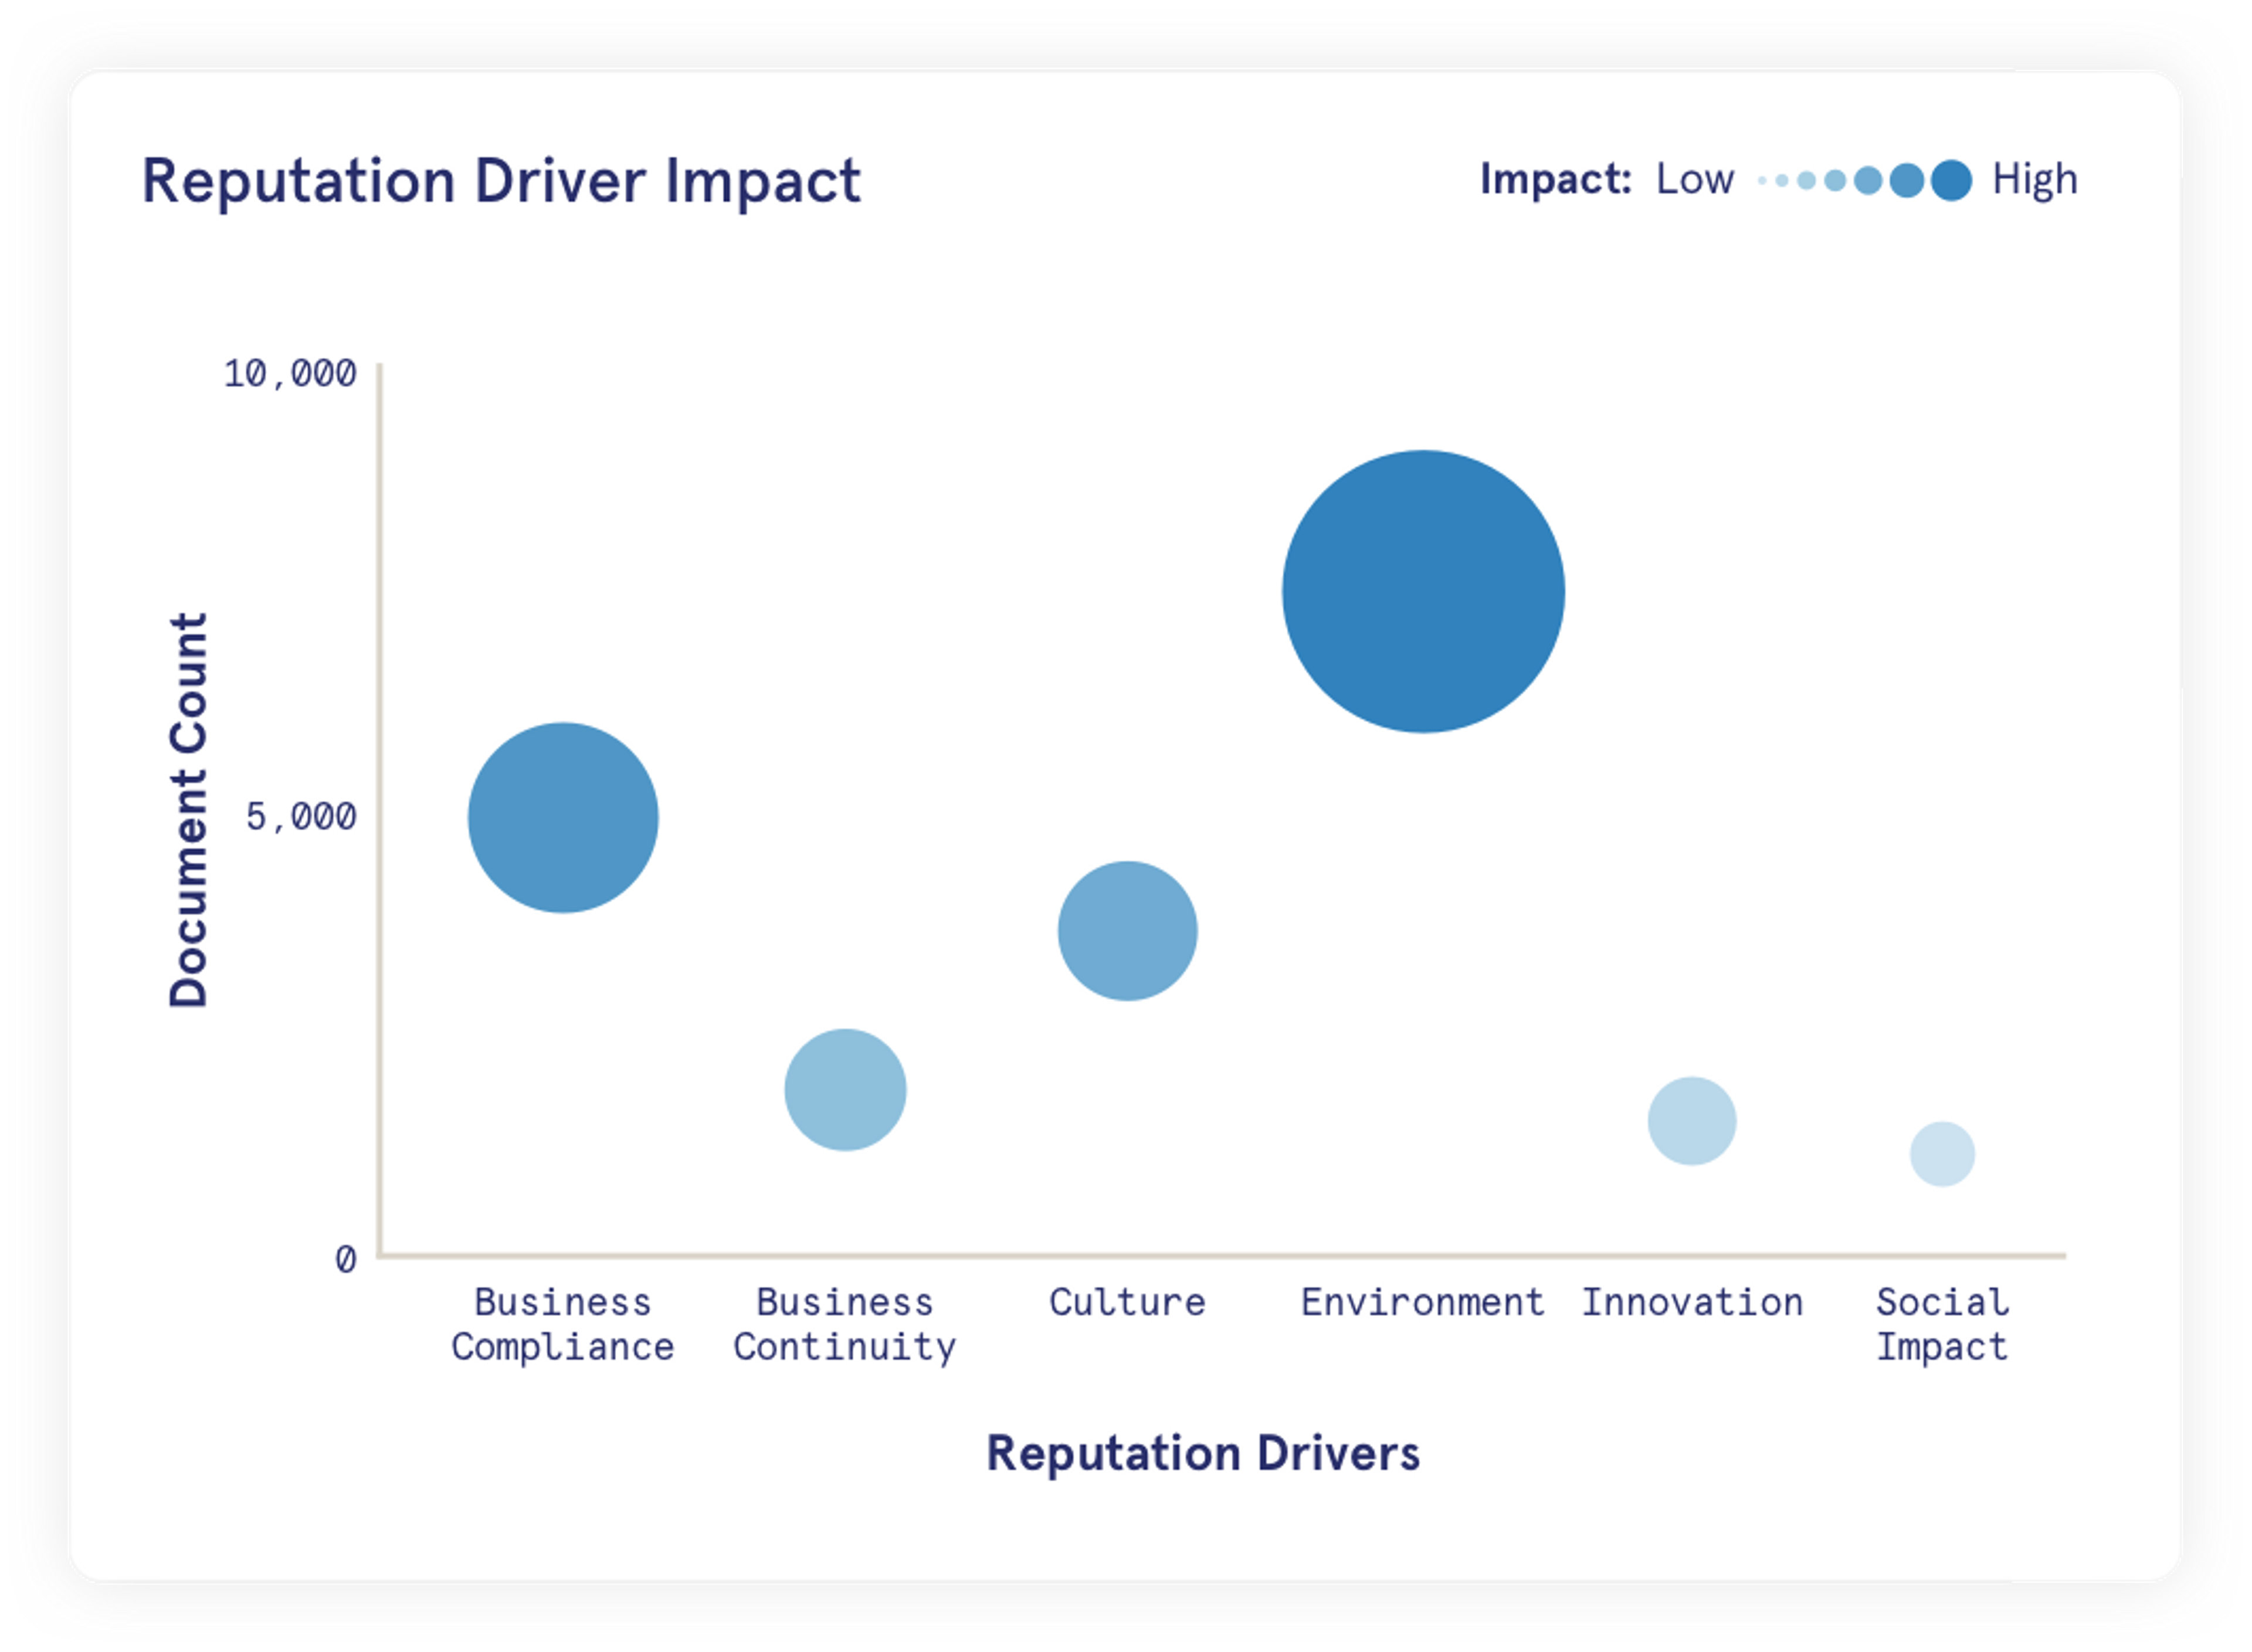 A chart displaying the breakdown of a company's impact score by reputational drivers